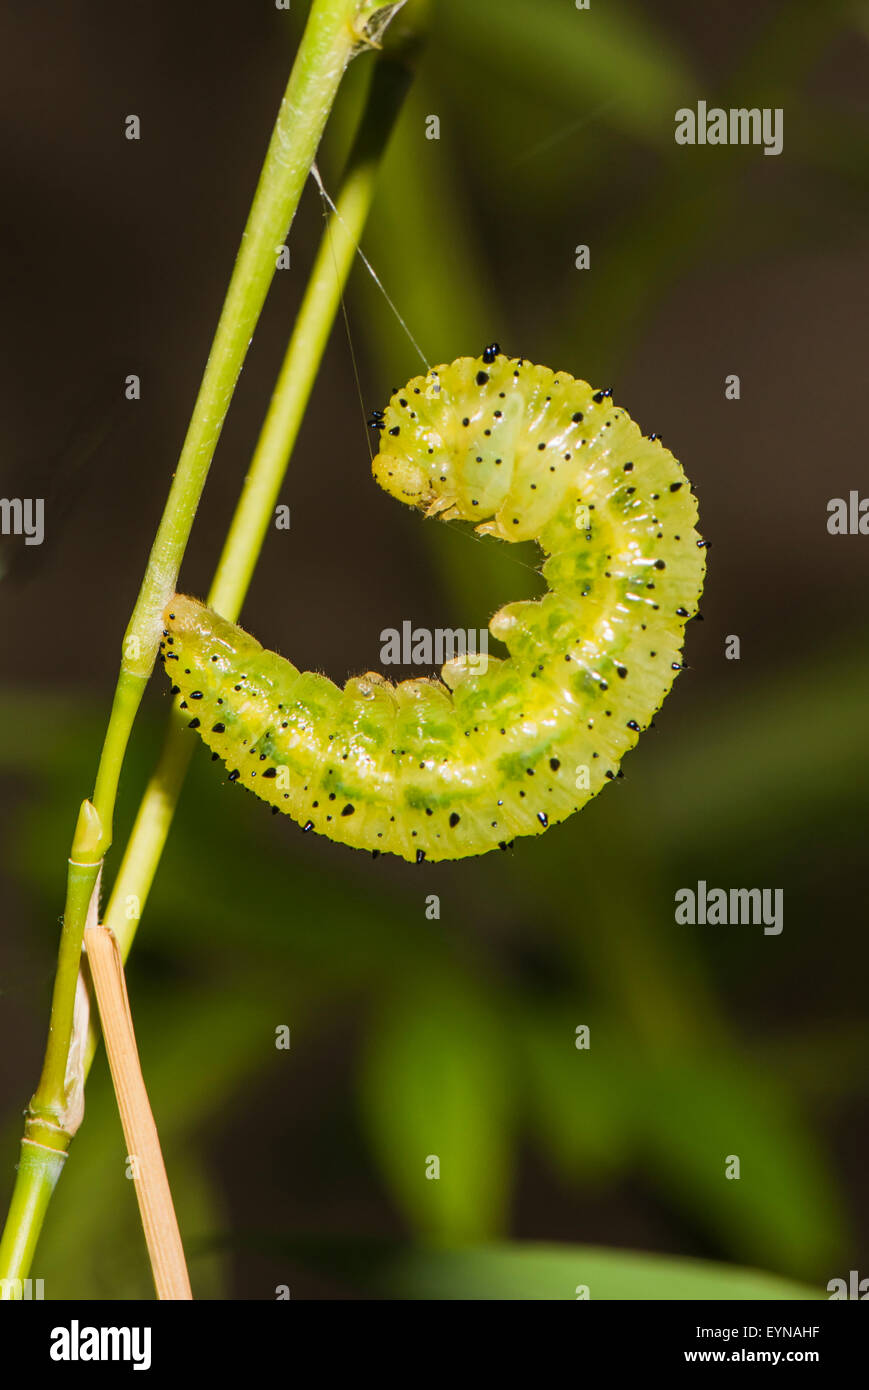 A pupating caterpillar of the Banded King Shoemaker butterfly Stock Photo